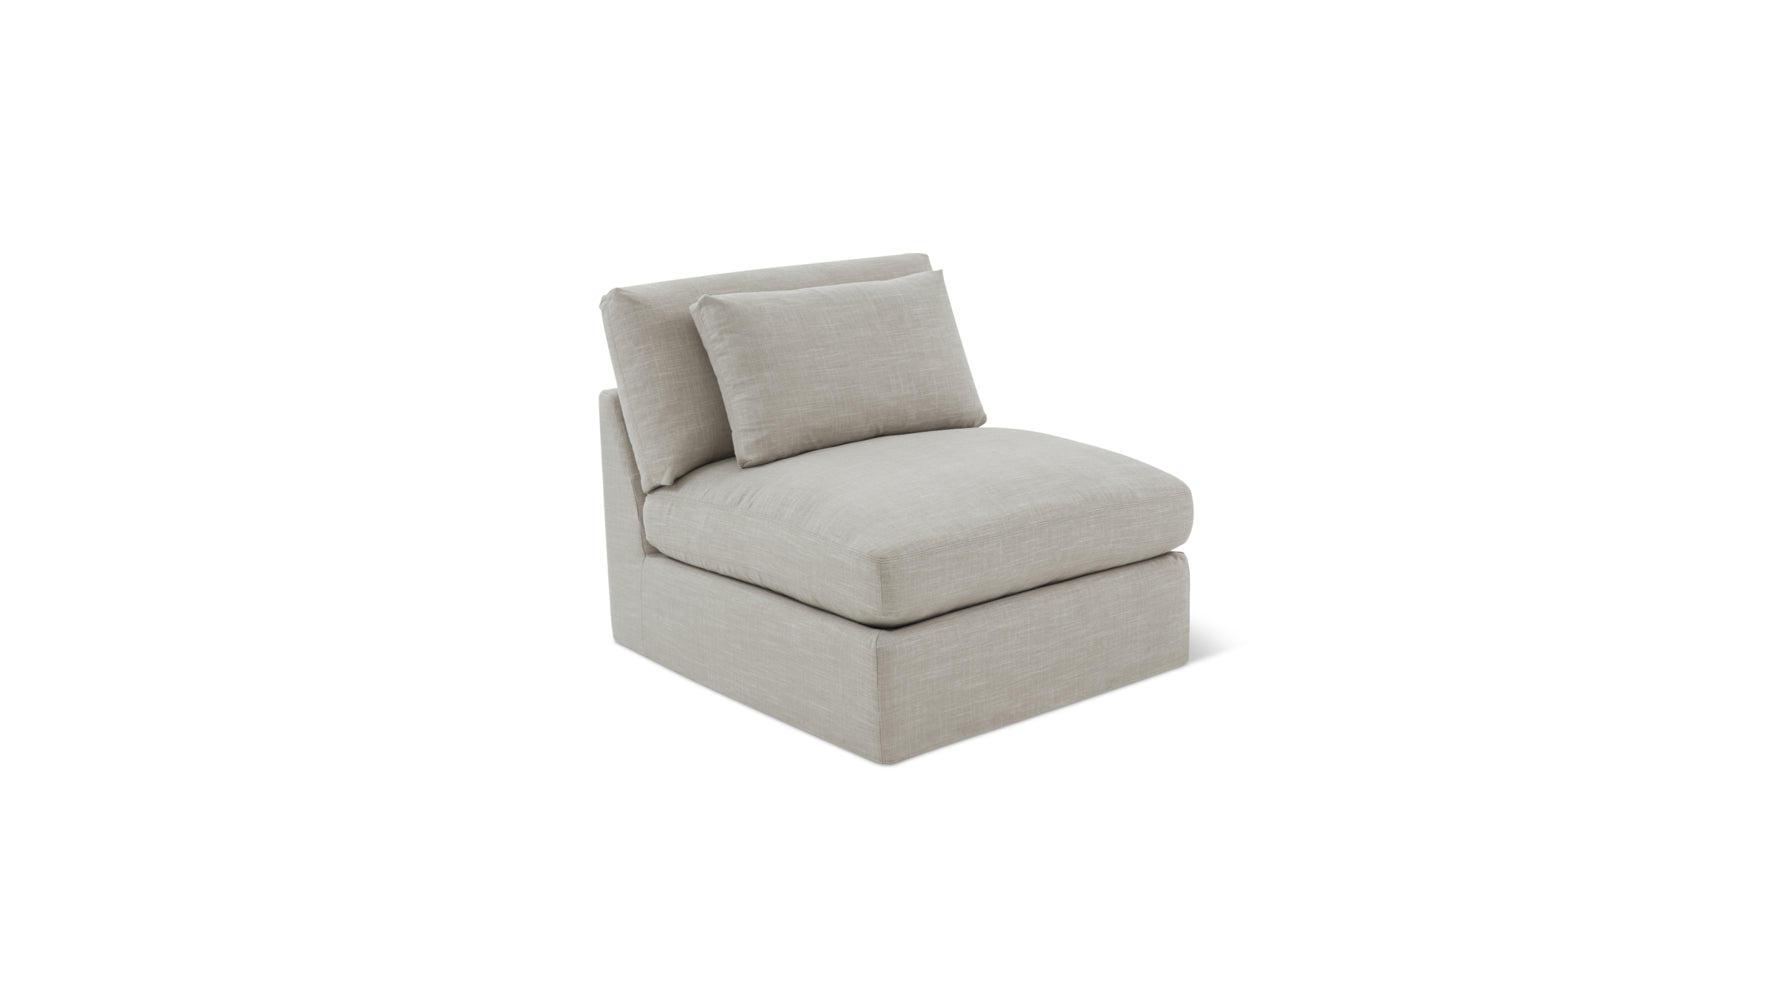 Get Together™ Armless Chair, Large, Light Pebble - Image 2